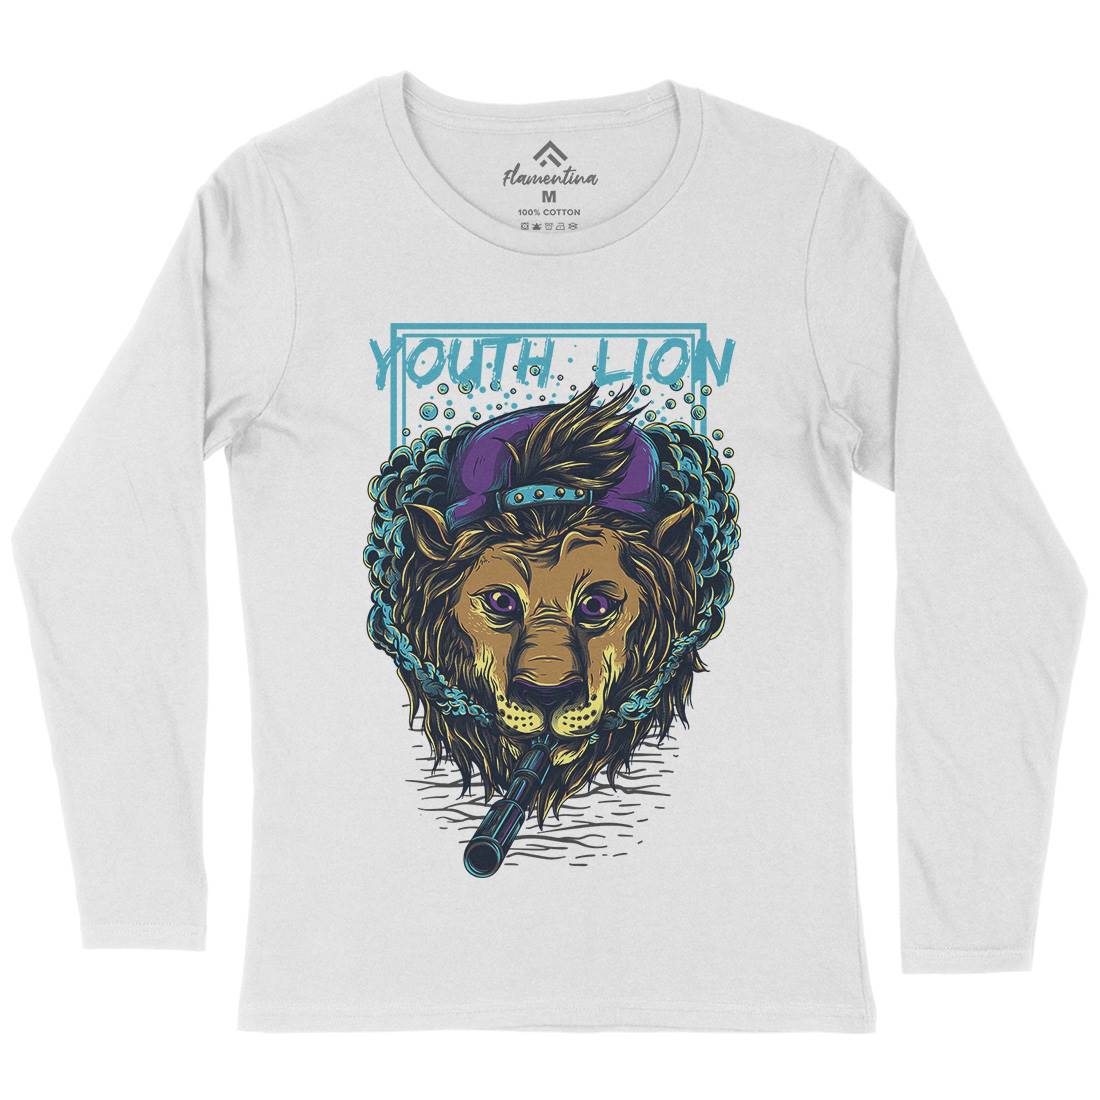 Youth Lion Womens Long Sleeve T-Shirt Animals D893